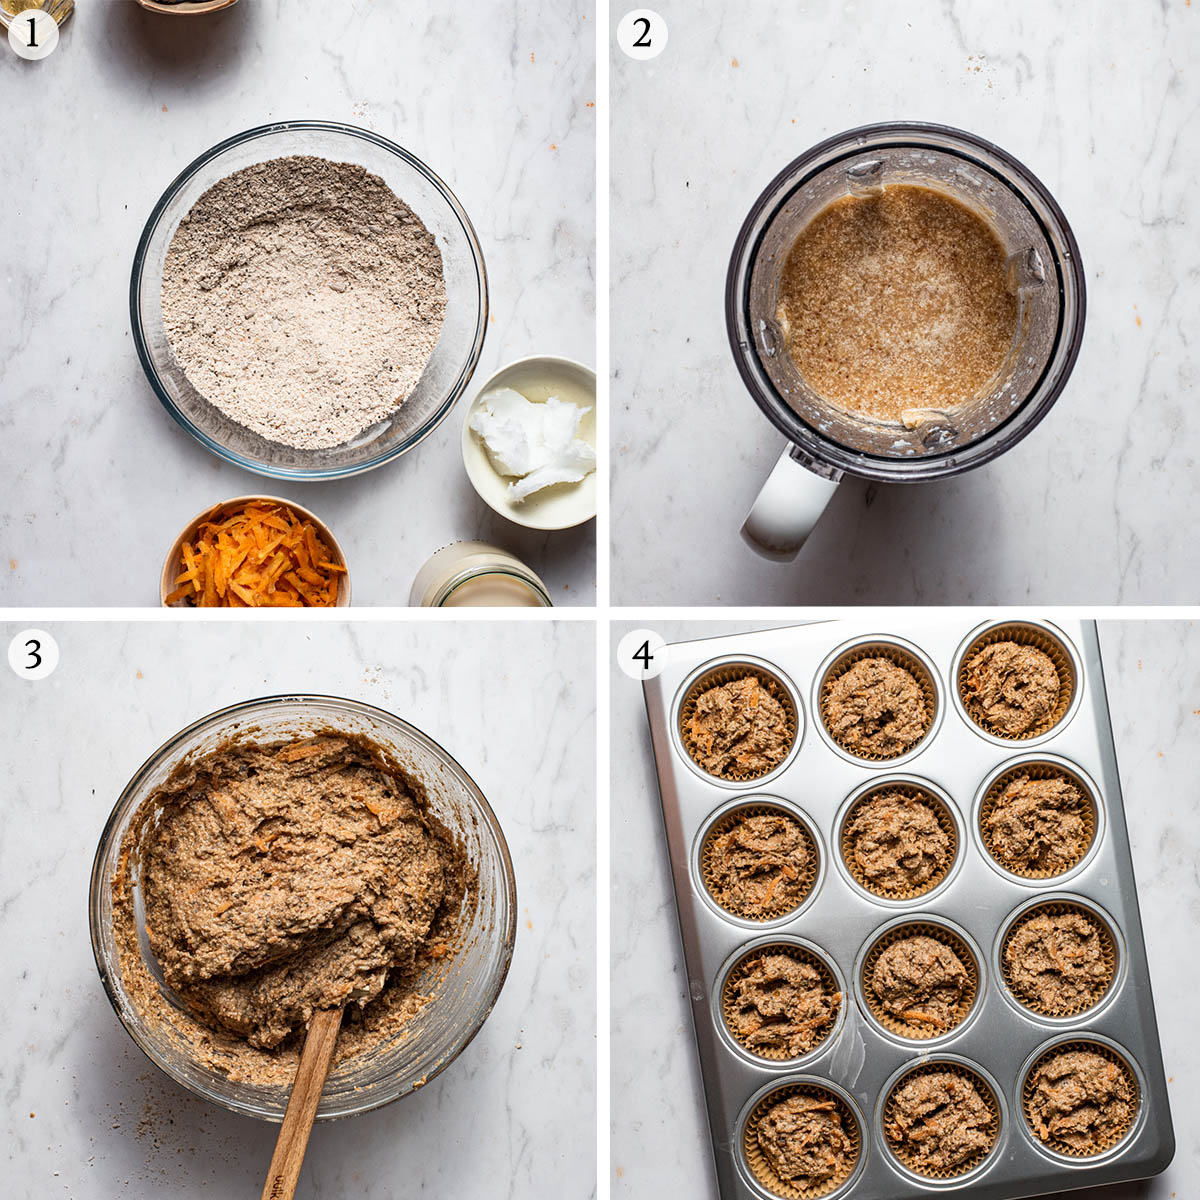 Vegan carrot muffins steps 1 to 4.